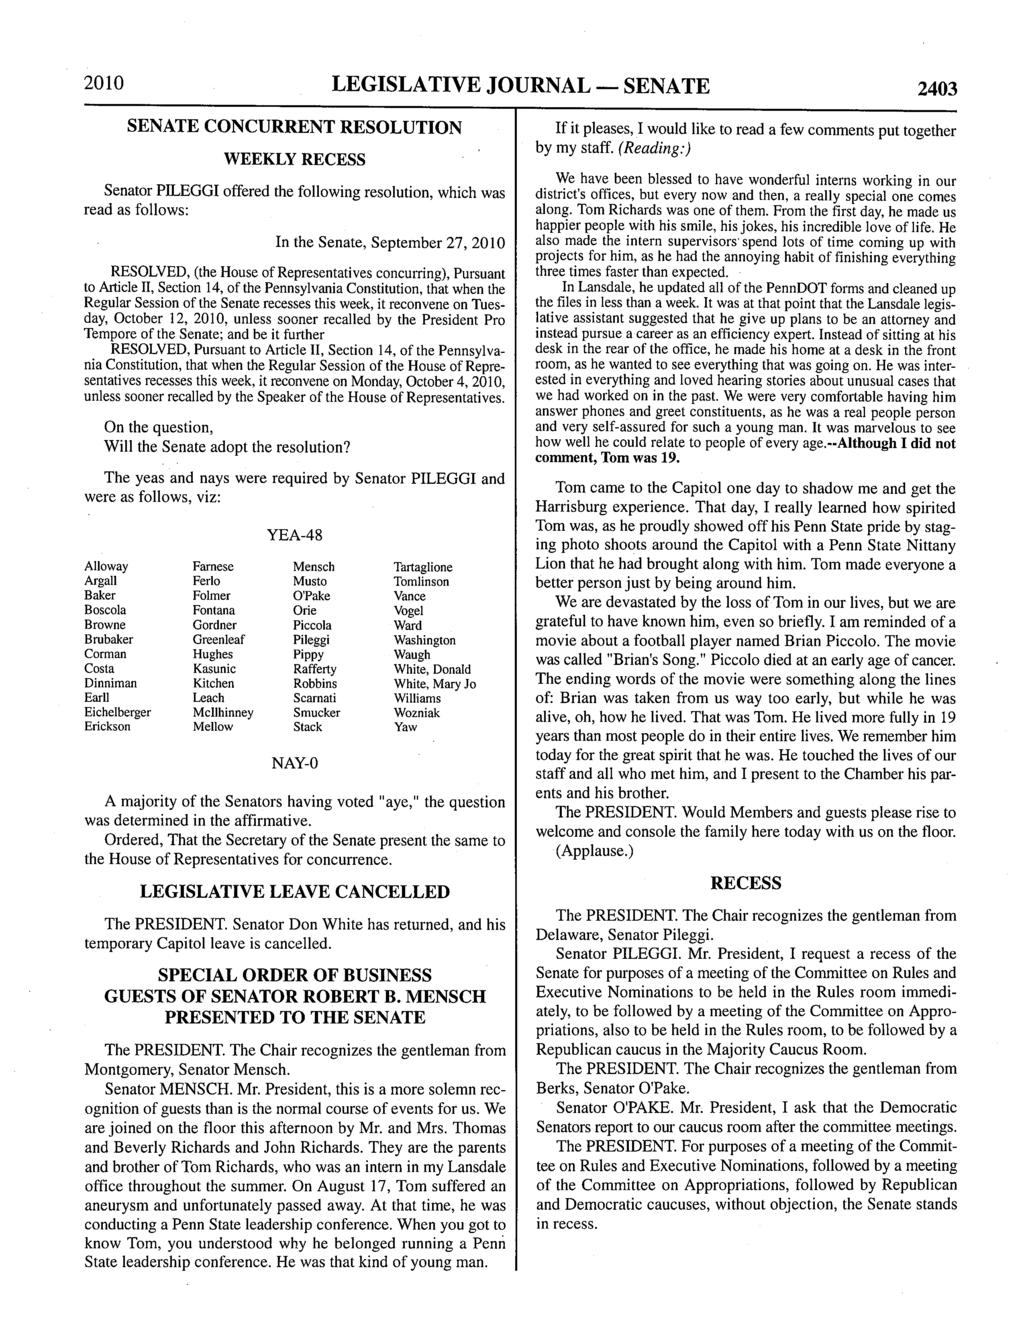 2010 LEGISLATIVE JOURNAL - SENATE 2403 SENATE CONCURRENT RESOLUTION WEEKLY RECESS Senator PILEGGI offered the following resolution, which was read as follows: In the Senate, RESOLVED, (the House of